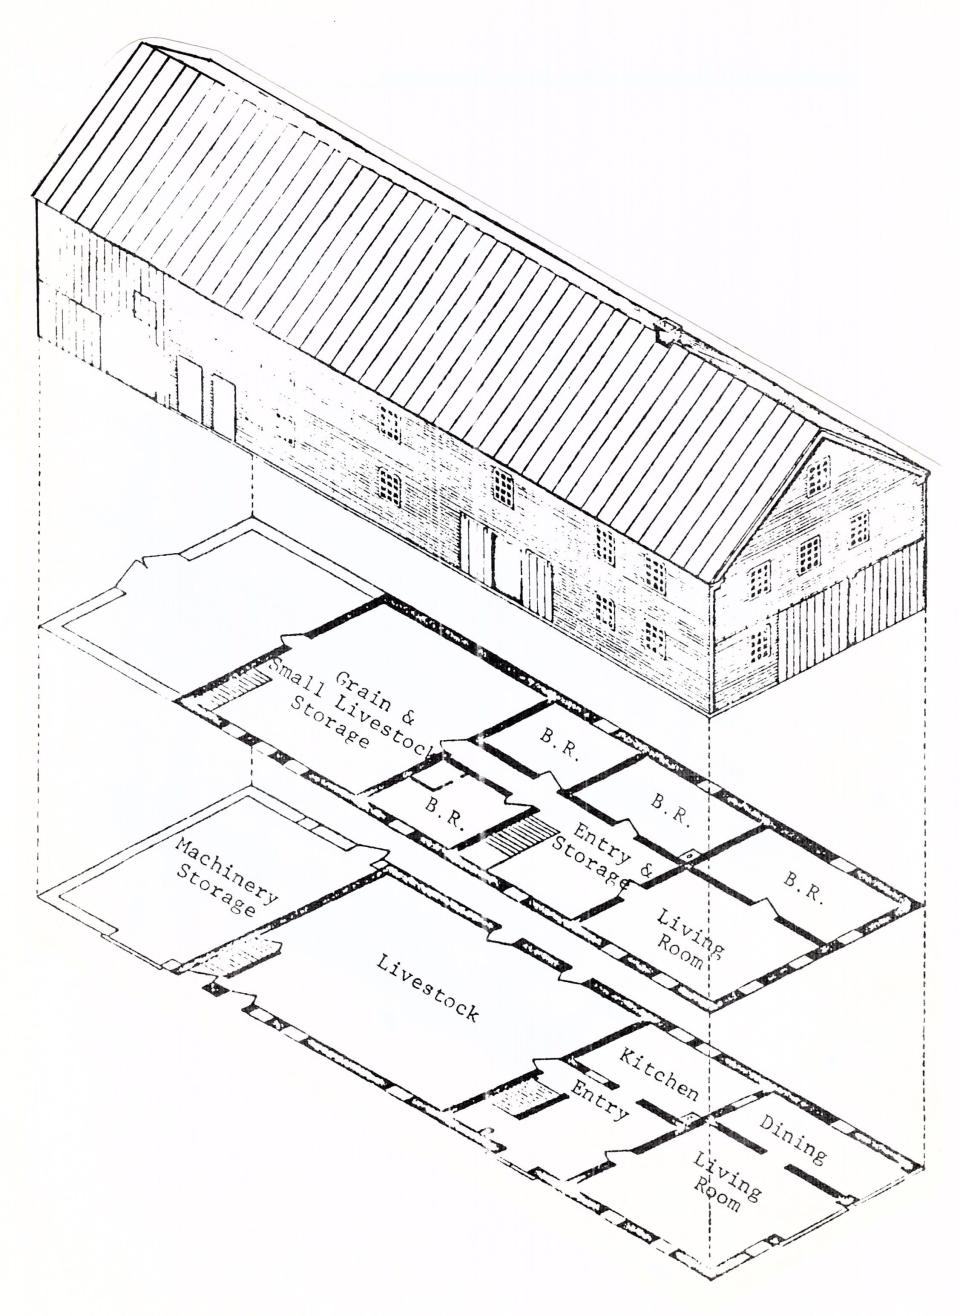 Architectural drawing of the Lutze Housebarn (from the National Register of Historic Places nomination).